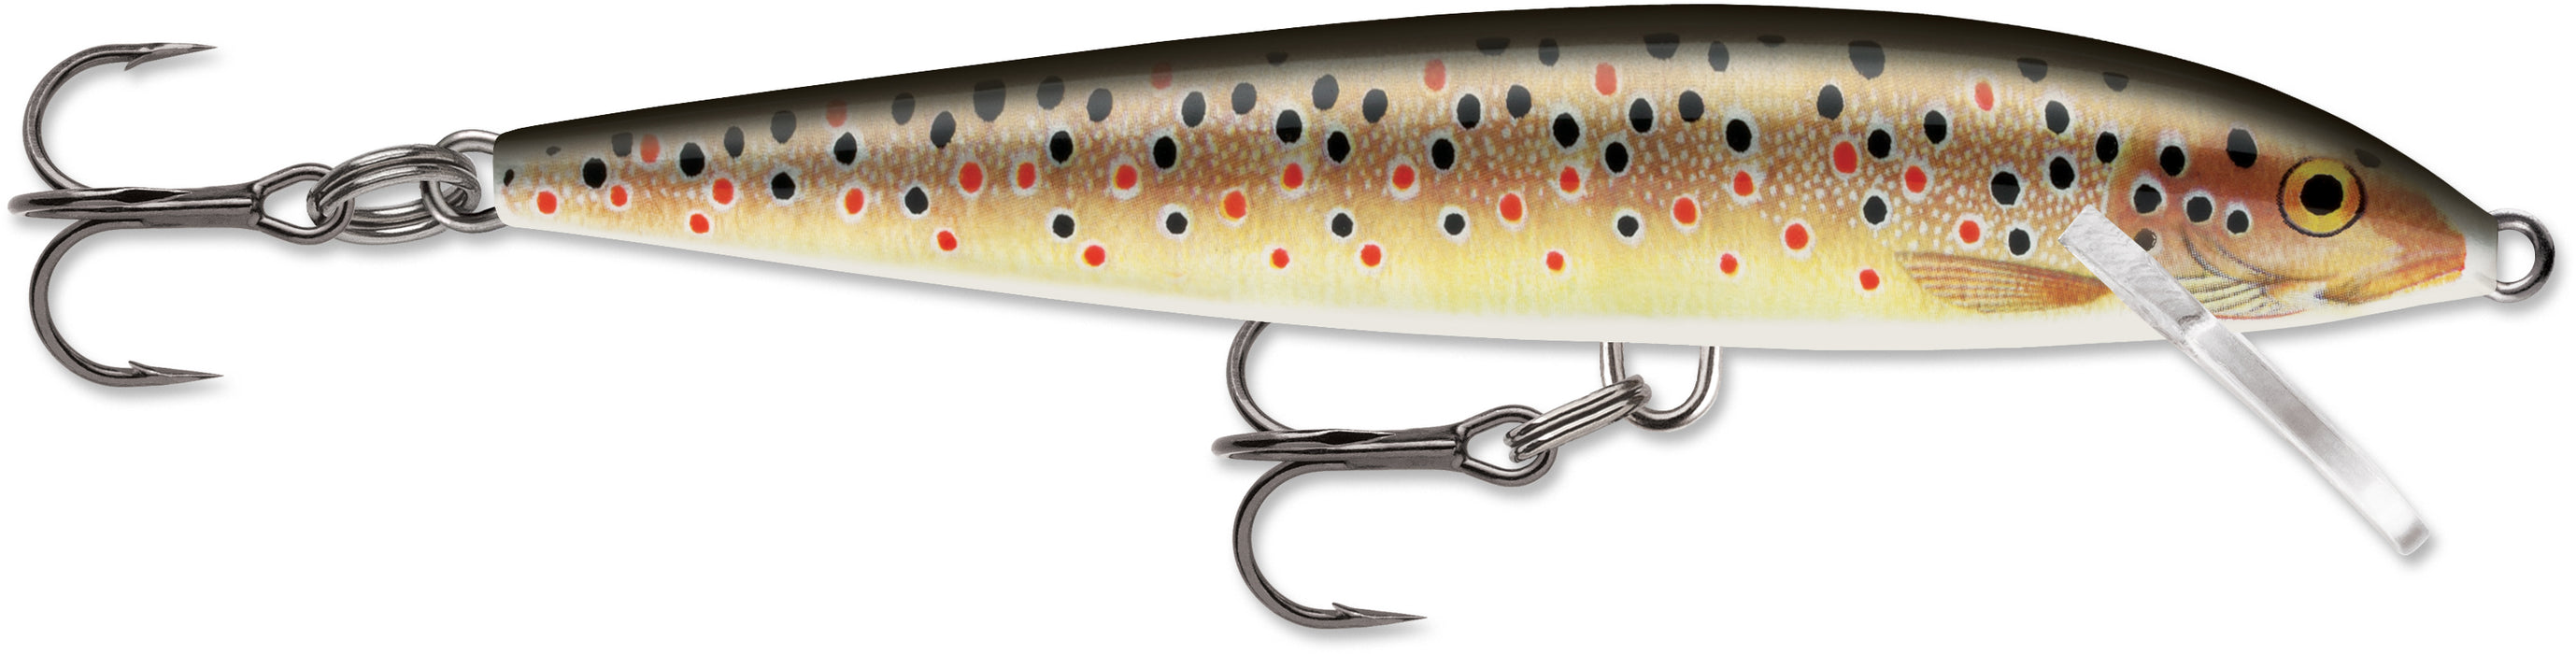 RAPALA 3 1/2 Original Floating F09 in BROOK TROUT for Bass